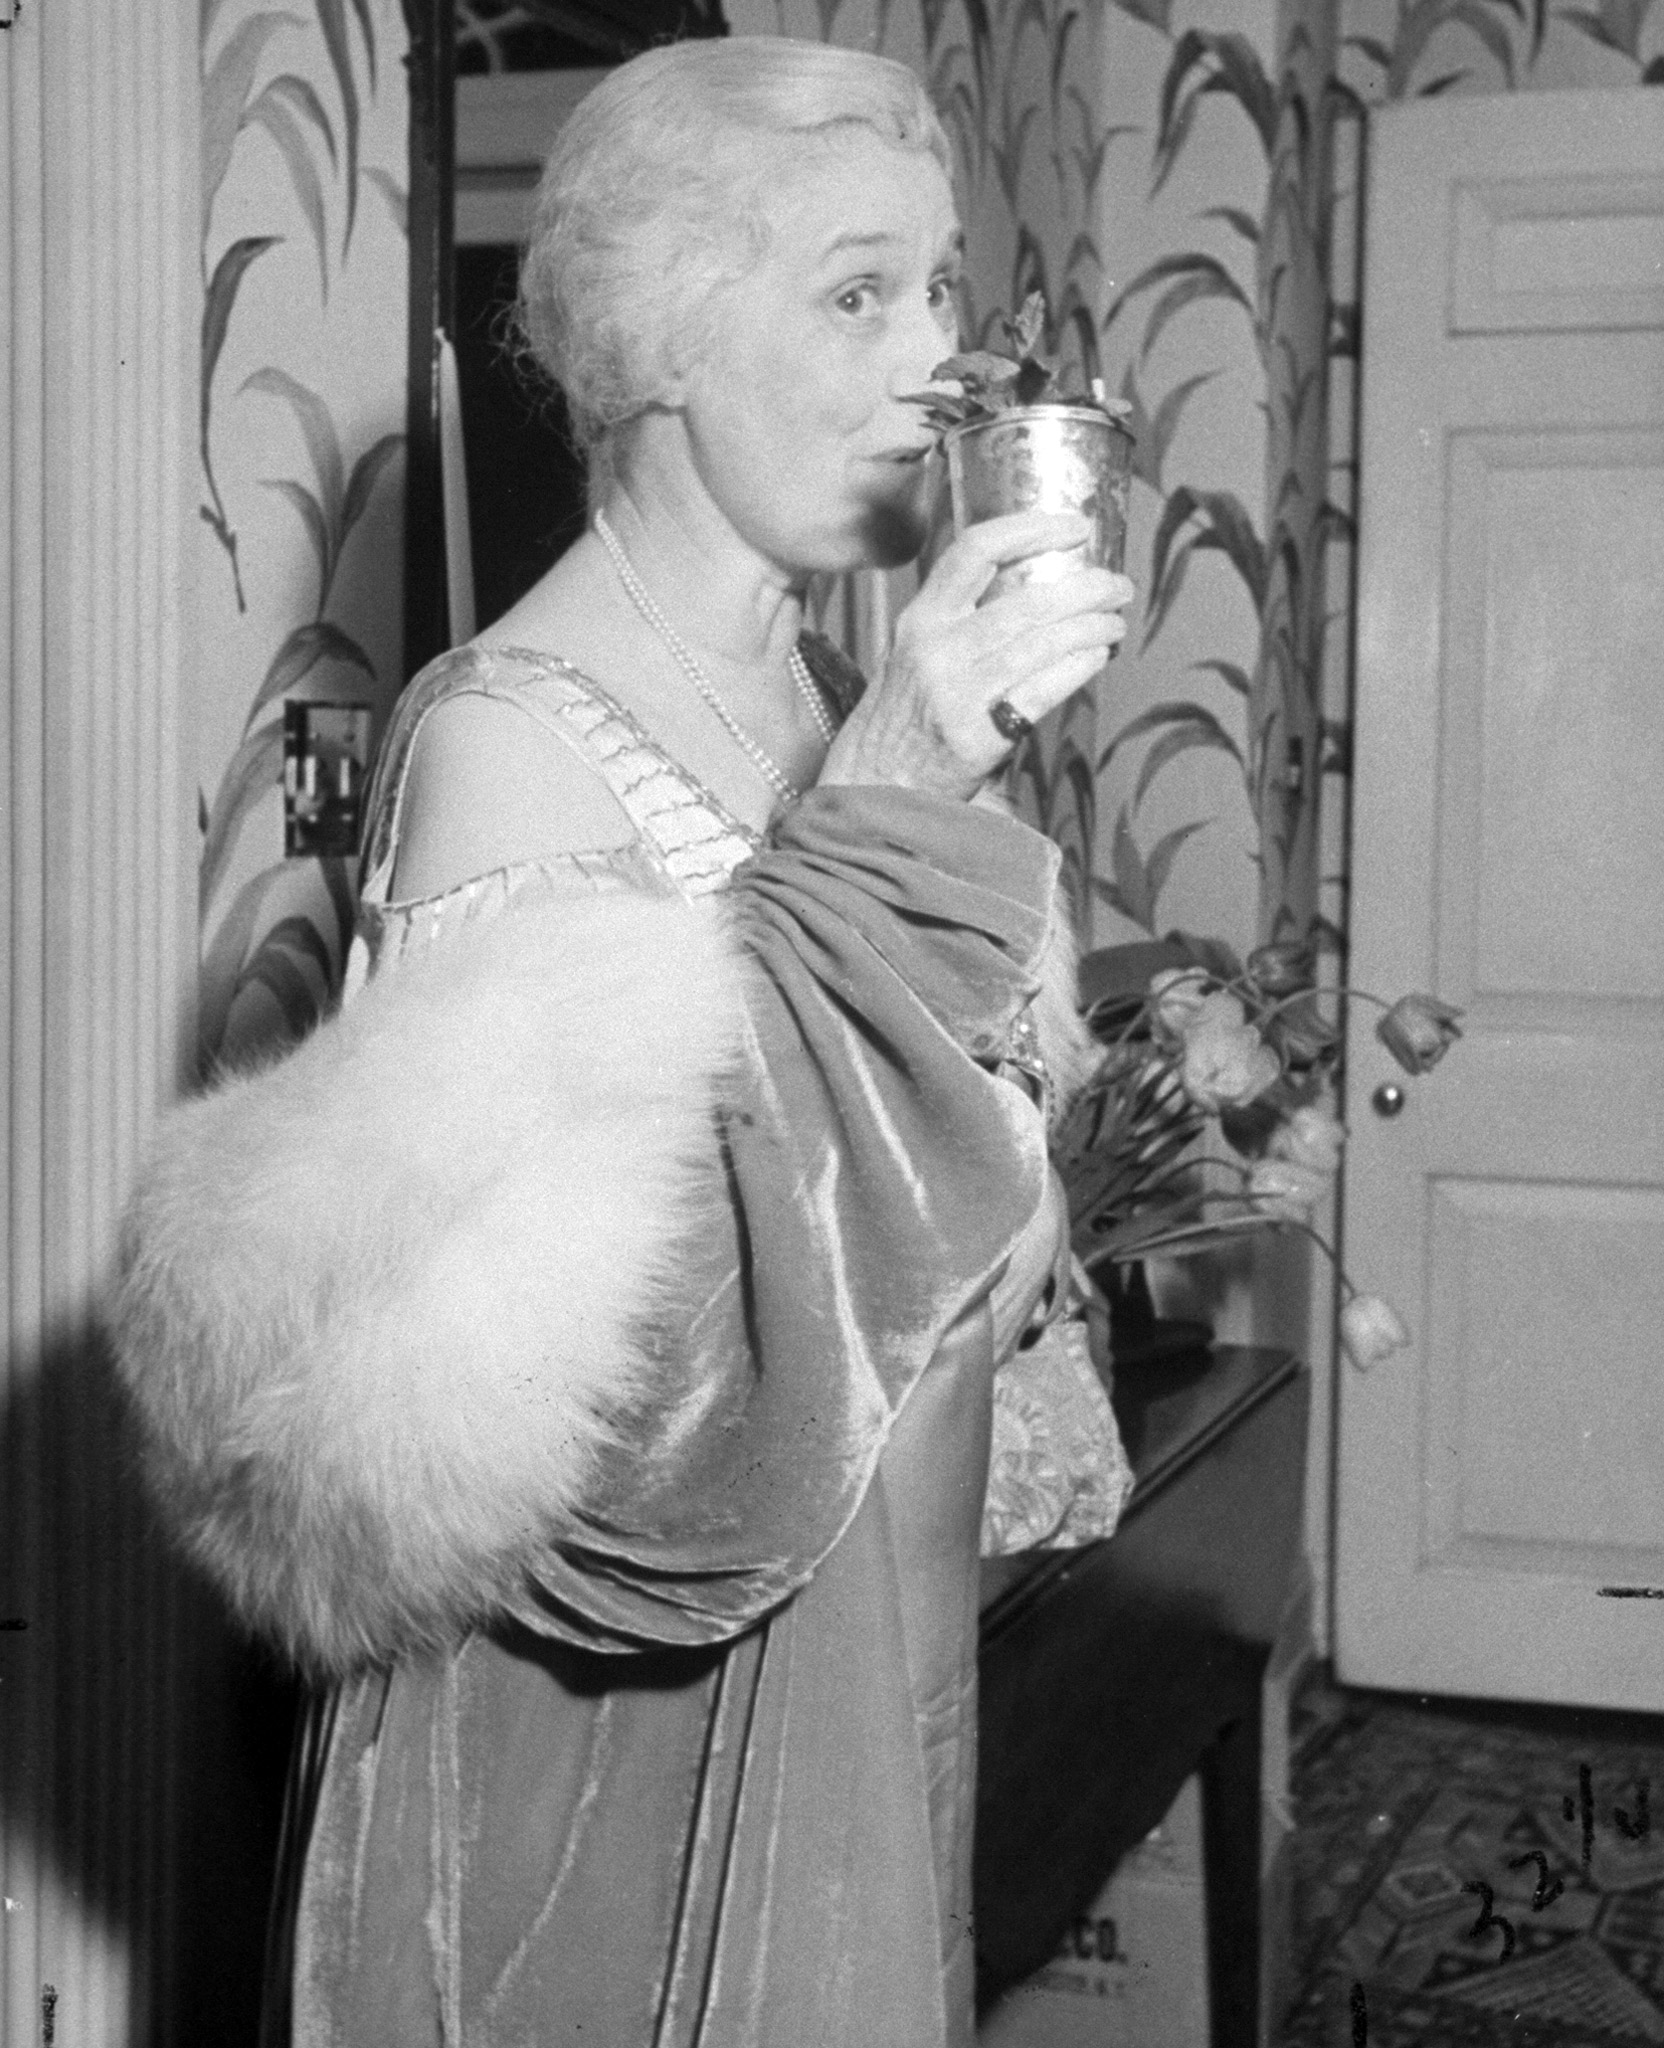 Mint julep drinker Mrs. Eugene Walker demonstrates how a Louisville belle manages to achieve maturity gracefully and happily.